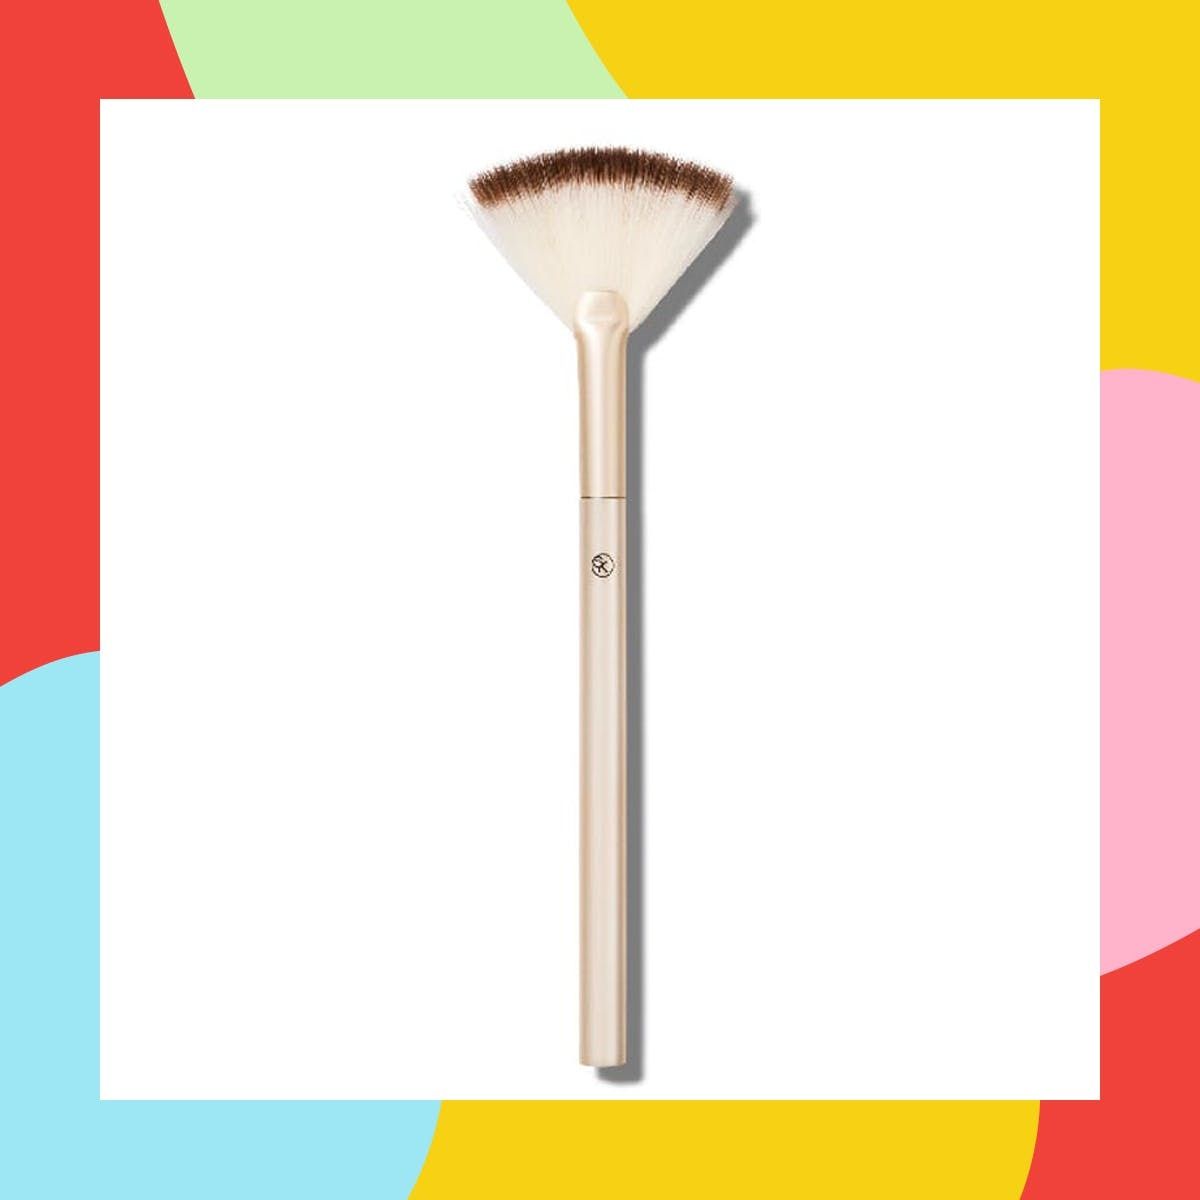 We’re Totally Obsessed With These Affordable Makeup Brushes